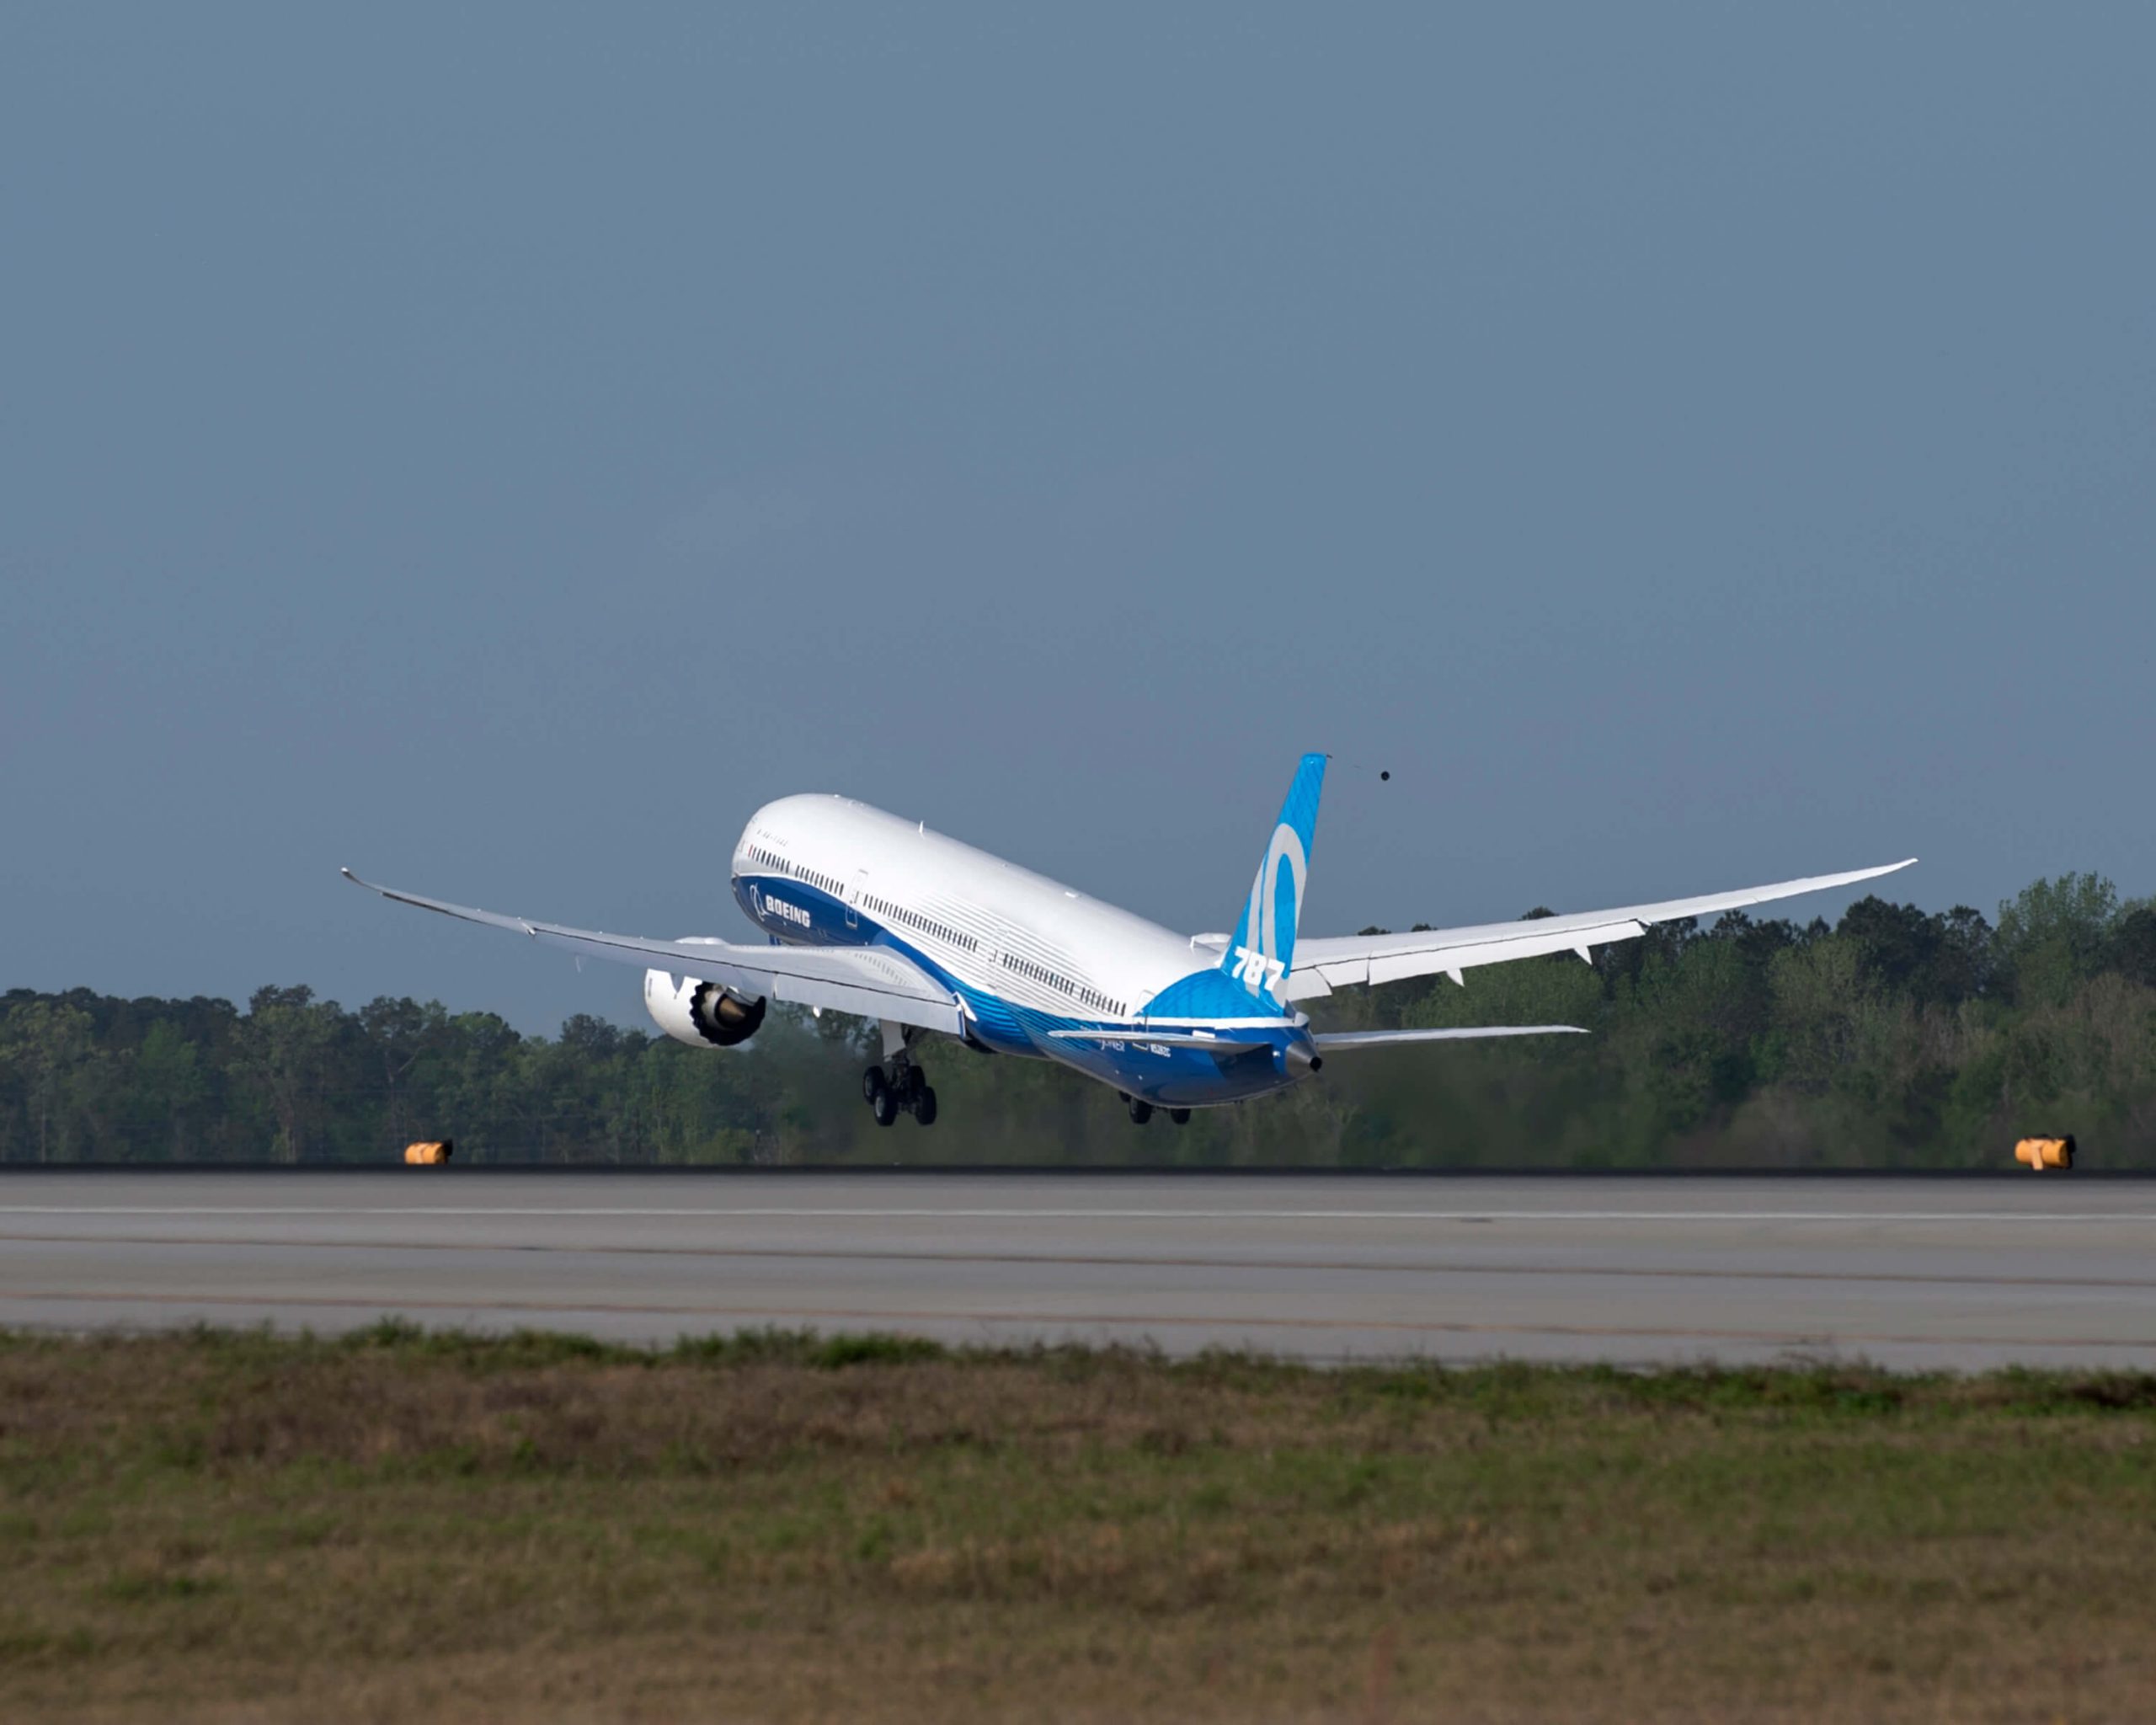 Boeing, Mitsubishi Heavy Industries Reach Agreement on Cost Reduction for 787 Production